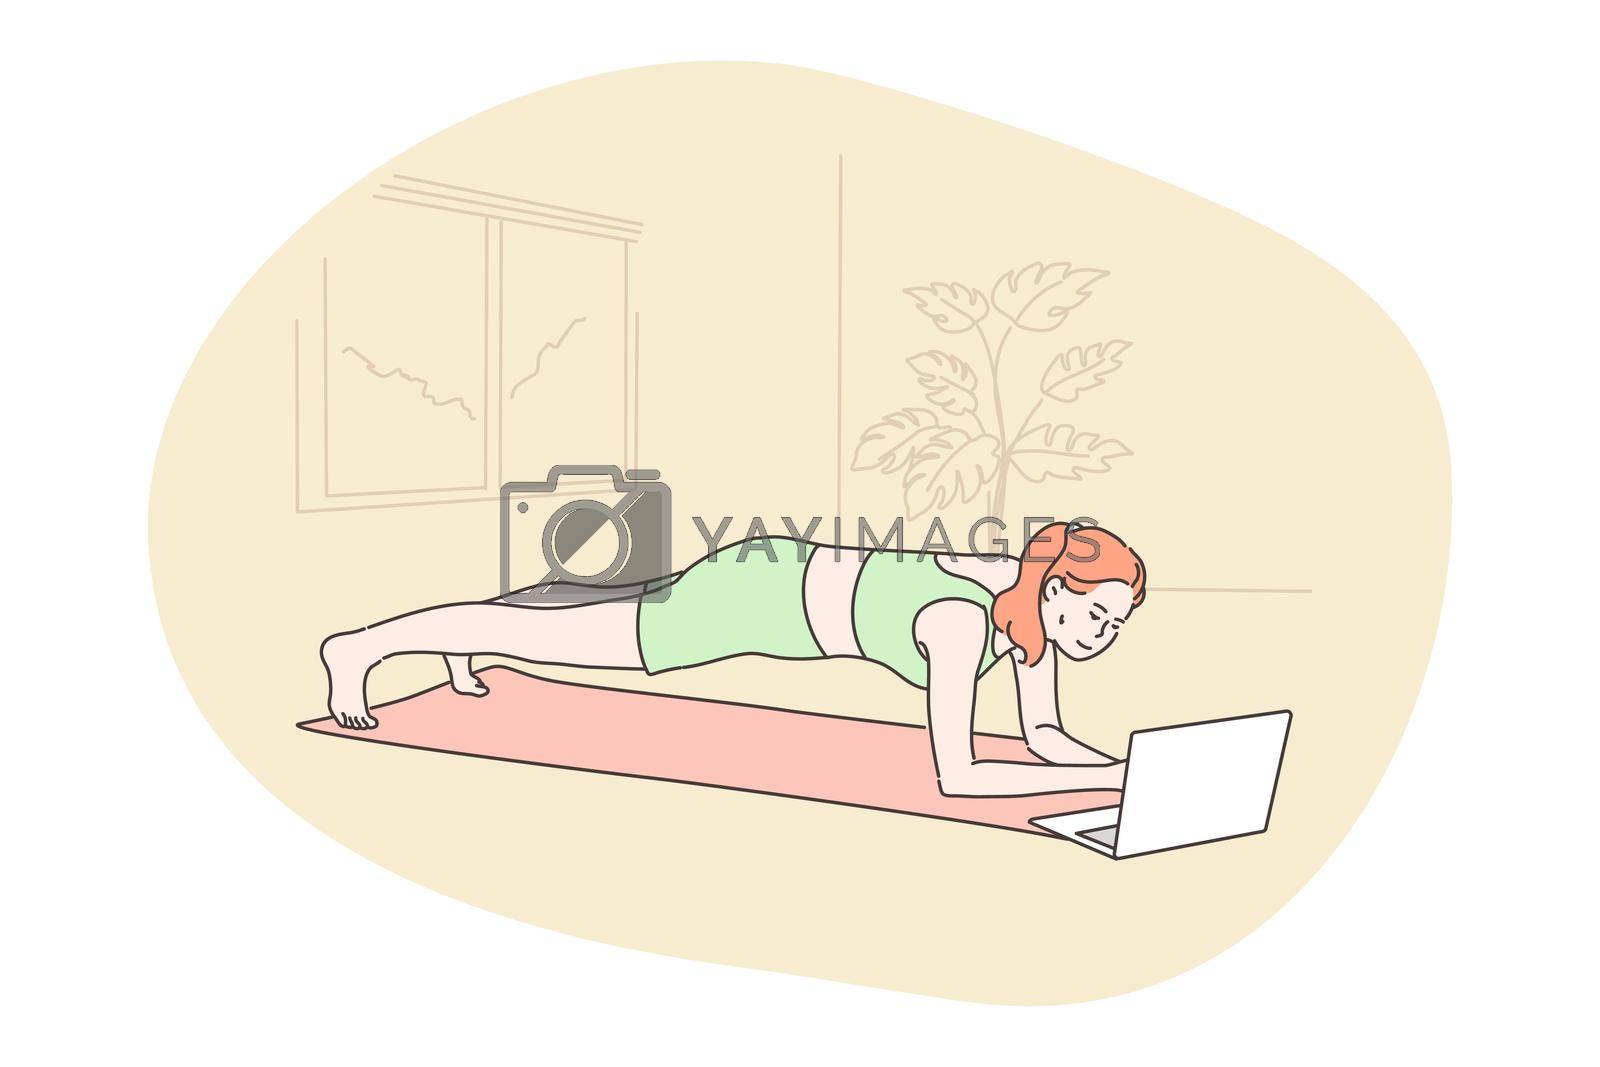 Sport training, yoga, fitness concept. Happy woman athlete in sportswear cartoon character does workout exercise standing in bar plank using laptop at home. Active lifestyle body care illustration.